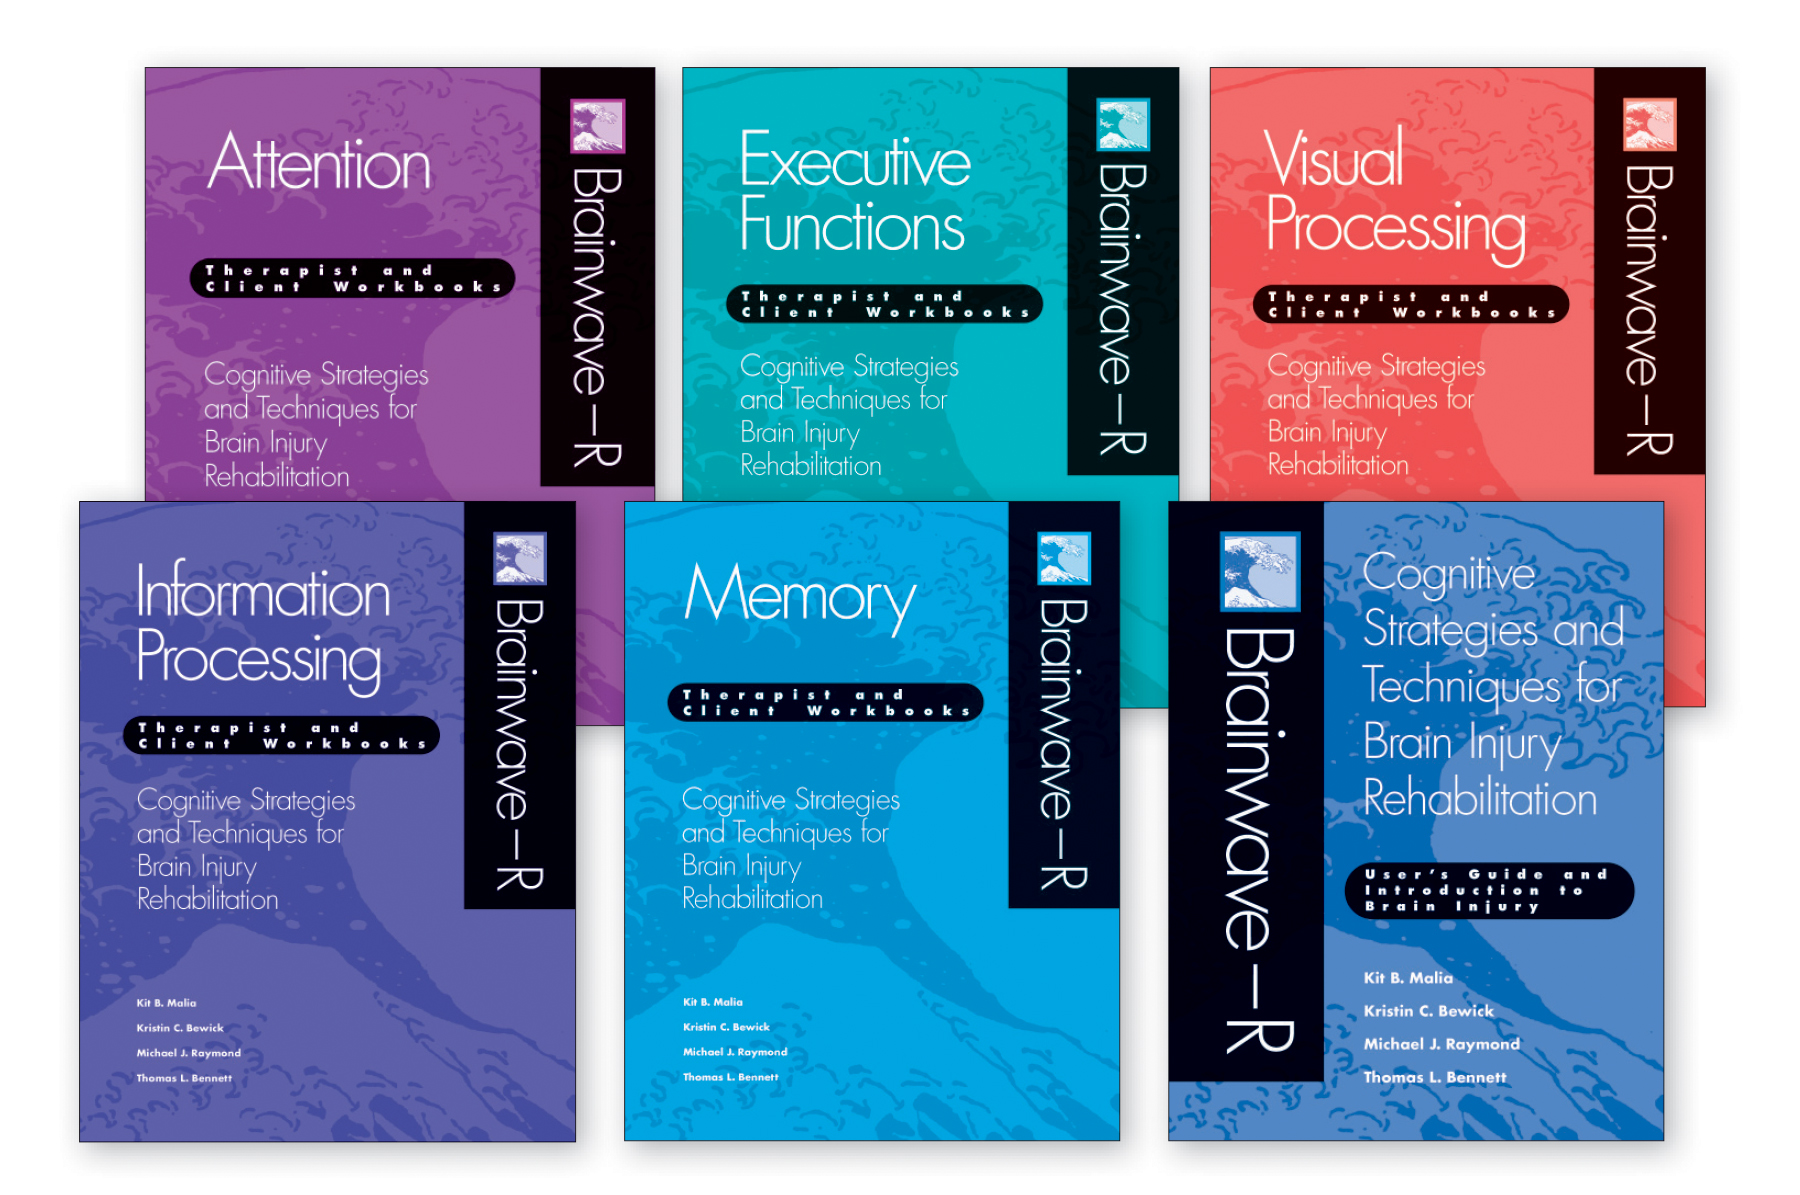 Brainwave-R: Cognitive Strategies and Techniques for Brain Injury Rehabilitation - 